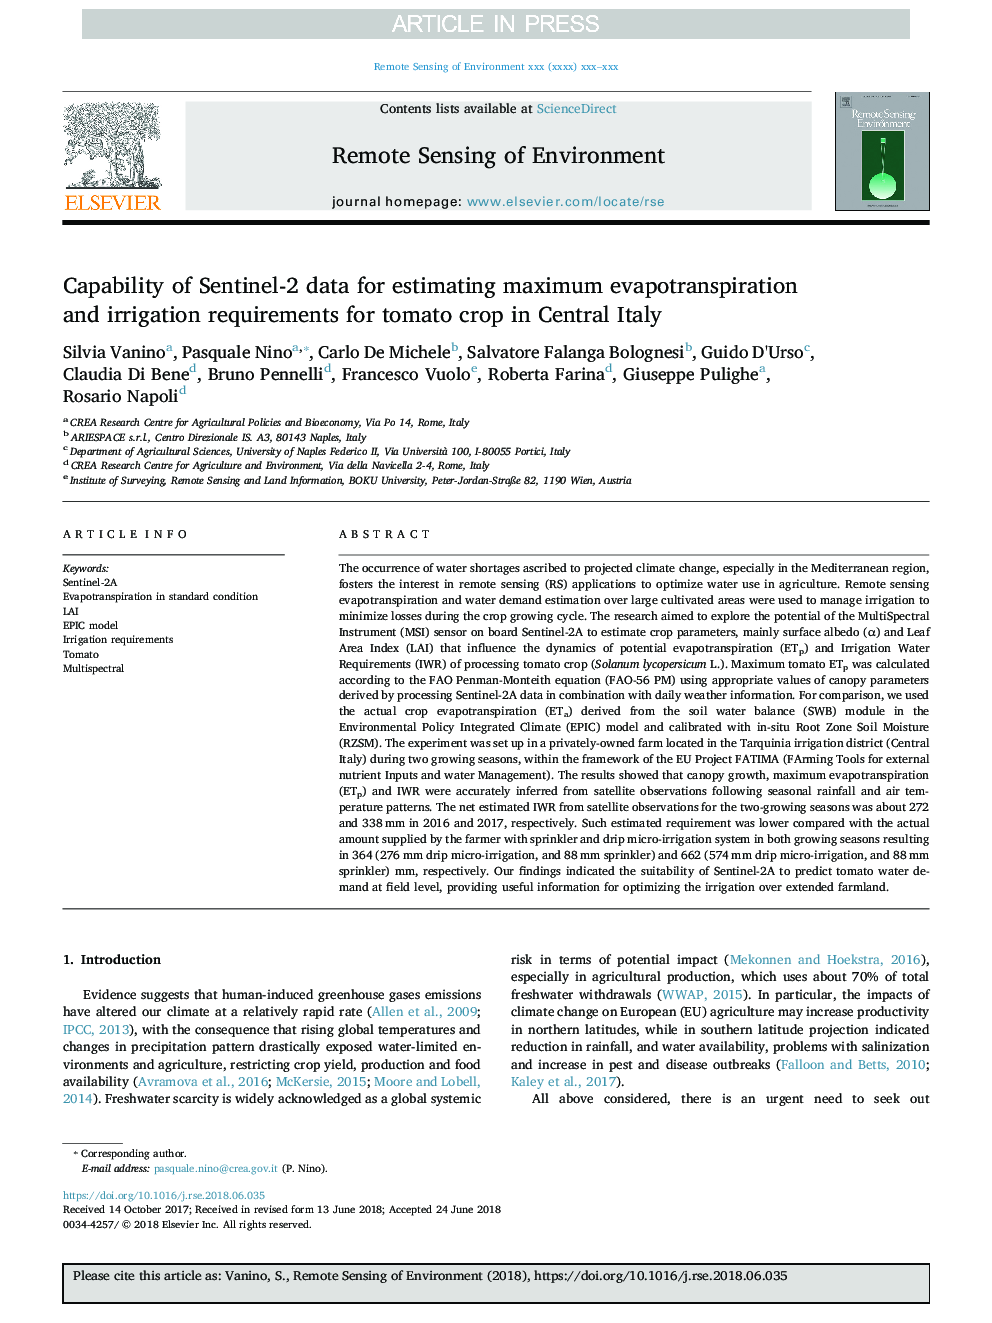 Capability of Sentinel-2 data for estimating maximum evapotranspiration and irrigation requirements for tomato crop in Central Italy